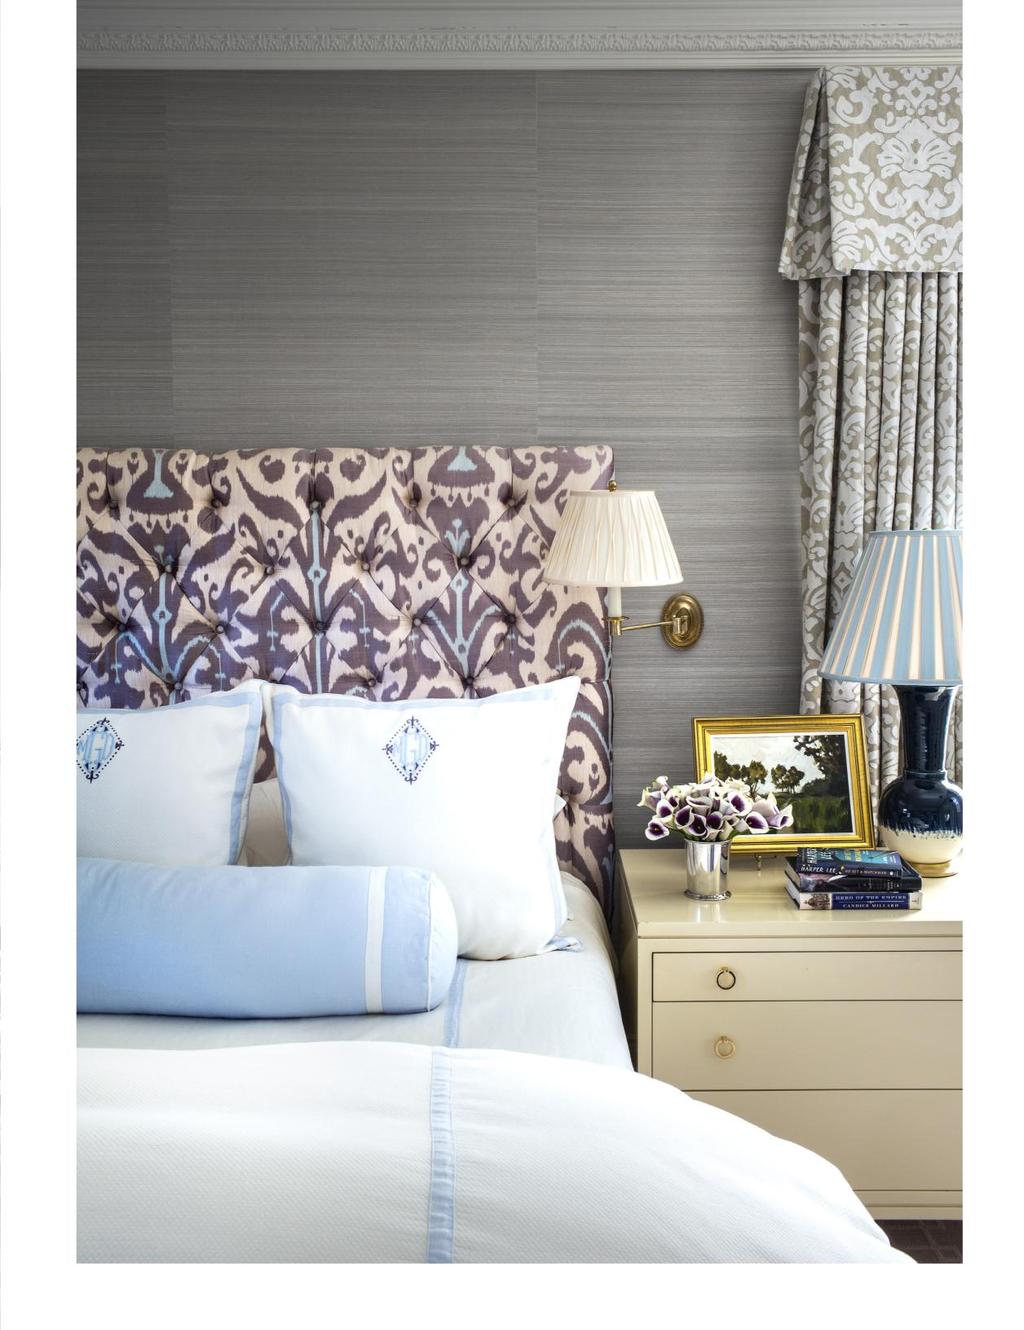 The master bedroom overlooks the woods. To warm it up, I wrapped the walls in a mushroom silk and covered the bed in a large-scale ikat in purple and pale blue.